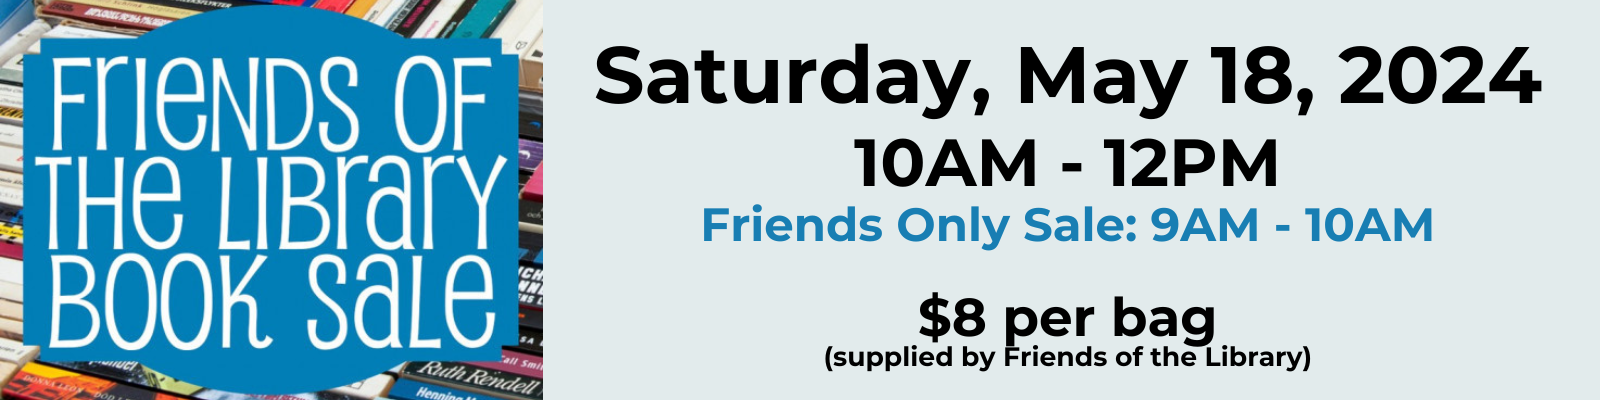 A banner for the Friends of the Library Used Book Sale on Saturday, May 18. Click the banner for more details.